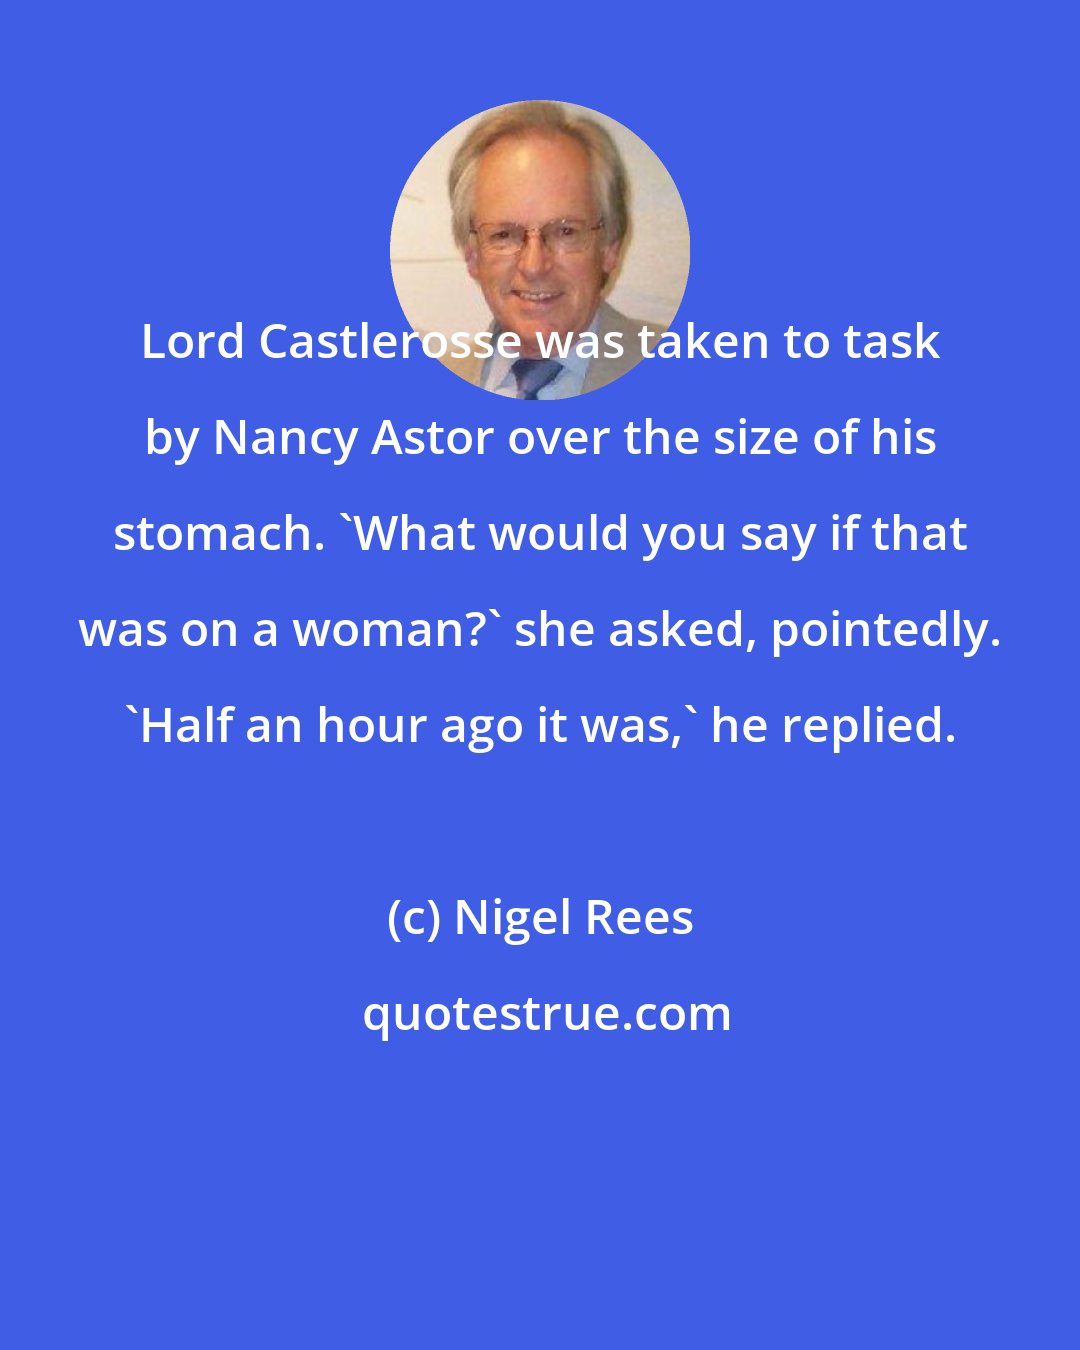 Nigel Rees: Lord Castlerosse was taken to task by Nancy Astor over the size of his stomach. 'What would you say if that was on a woman?' she asked, pointedly. 'Half an hour ago it was,' he replied.